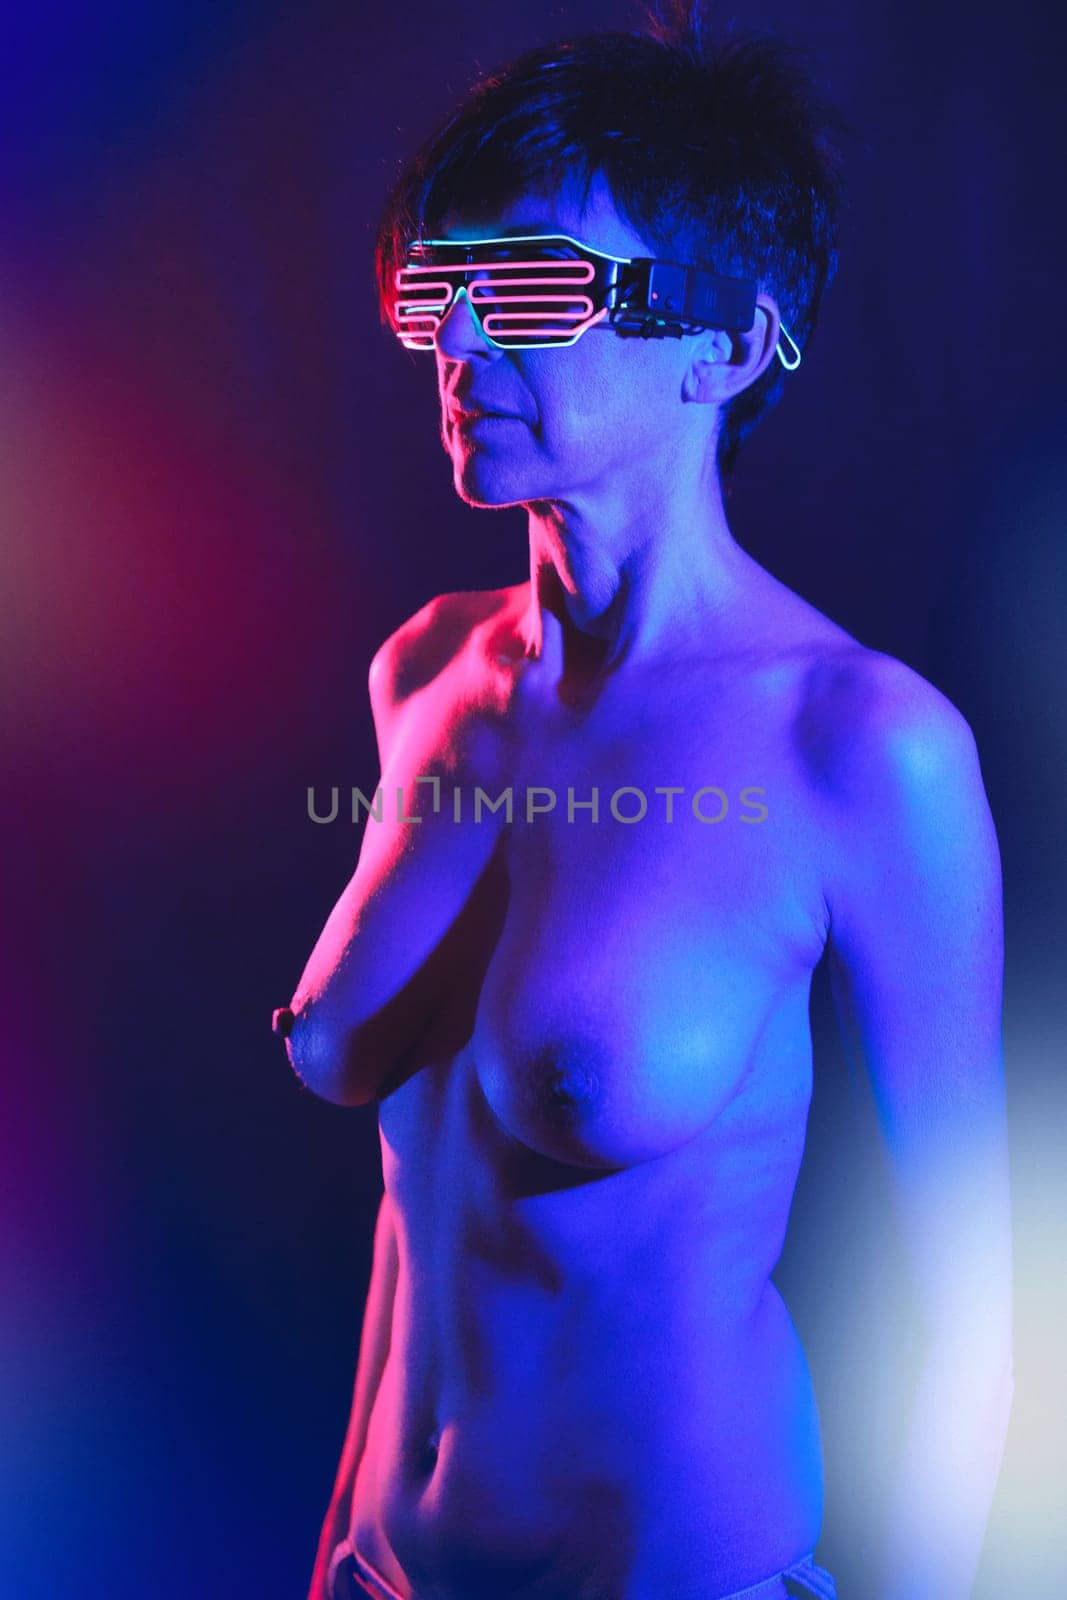 Concentrated adult female with naked breast and short dark hair in trendy neon striped shutter glasses looking away in illuminated studio